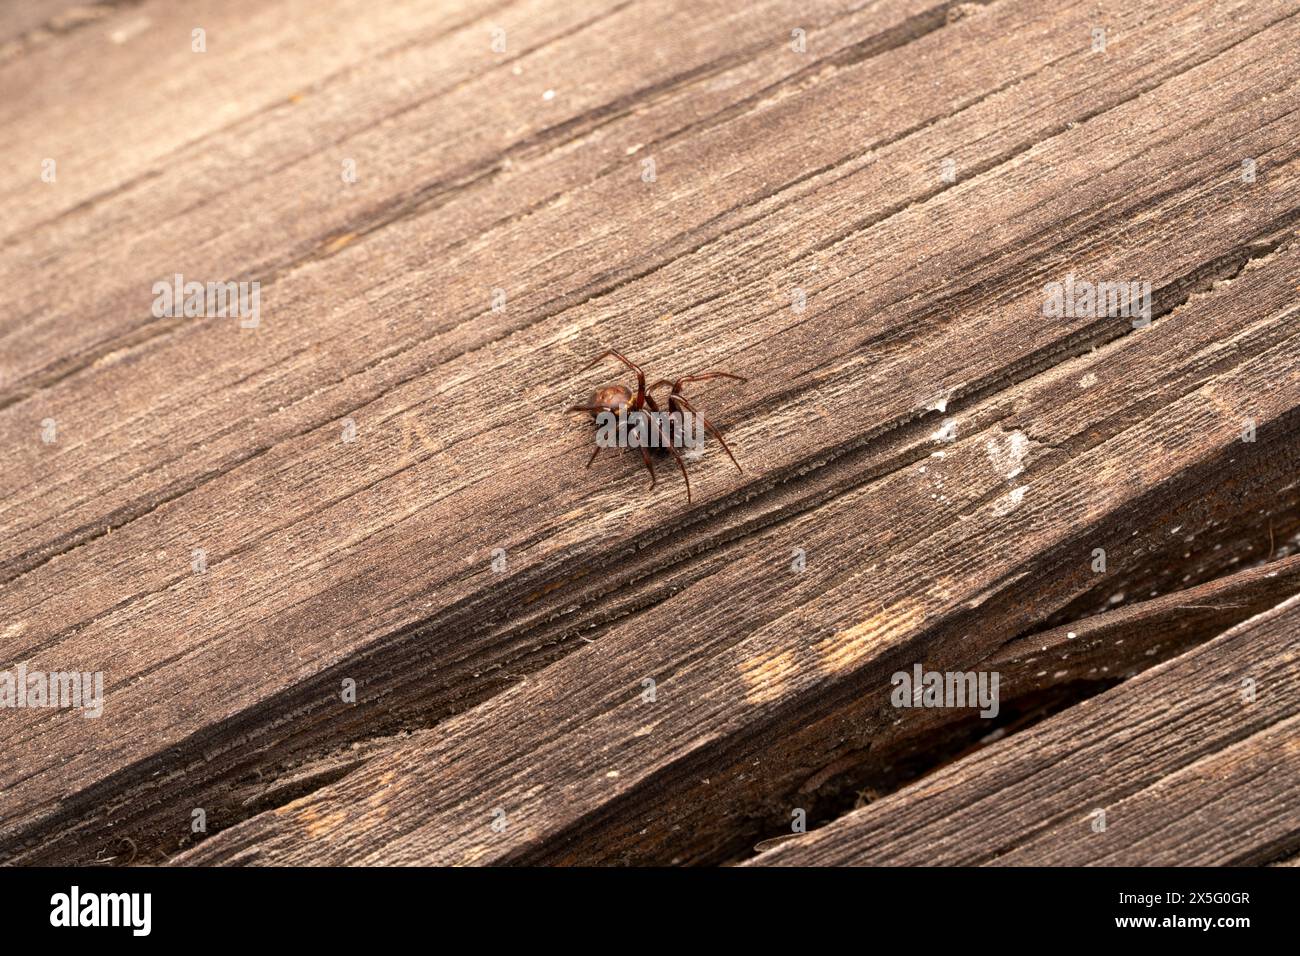 Steatoda bipunctata Family Theridiidae Genus Steatoda Cob-web spider wild nature insect photography, picture, wallpaper Stock Photo